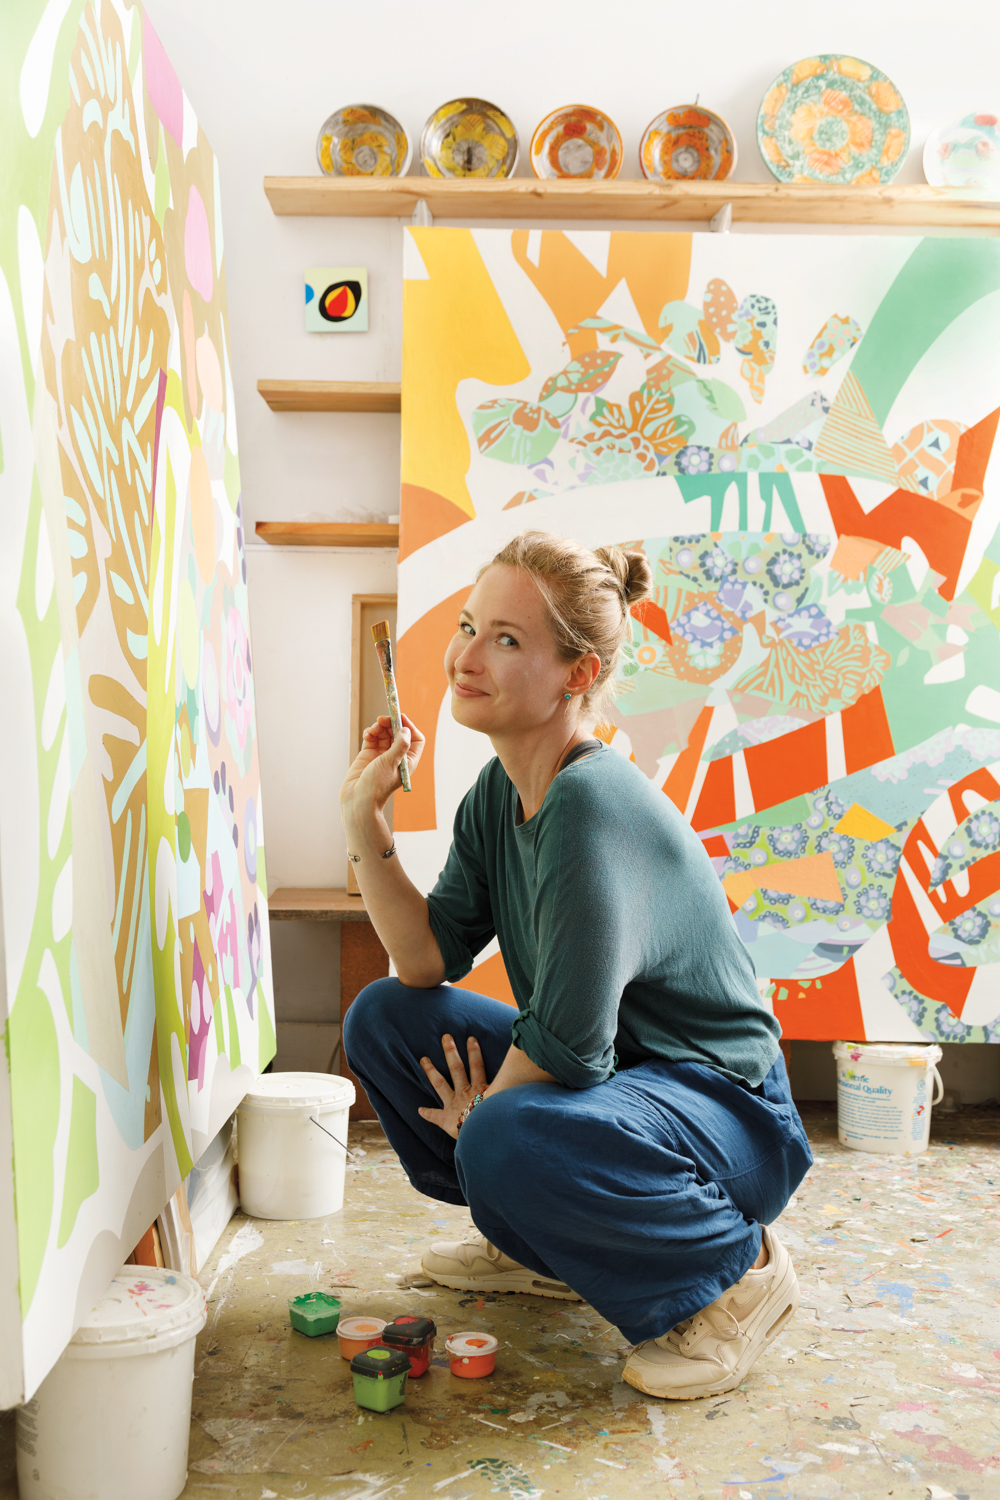 Woman holding a paintbrush crouching down before a colorful abstract painting